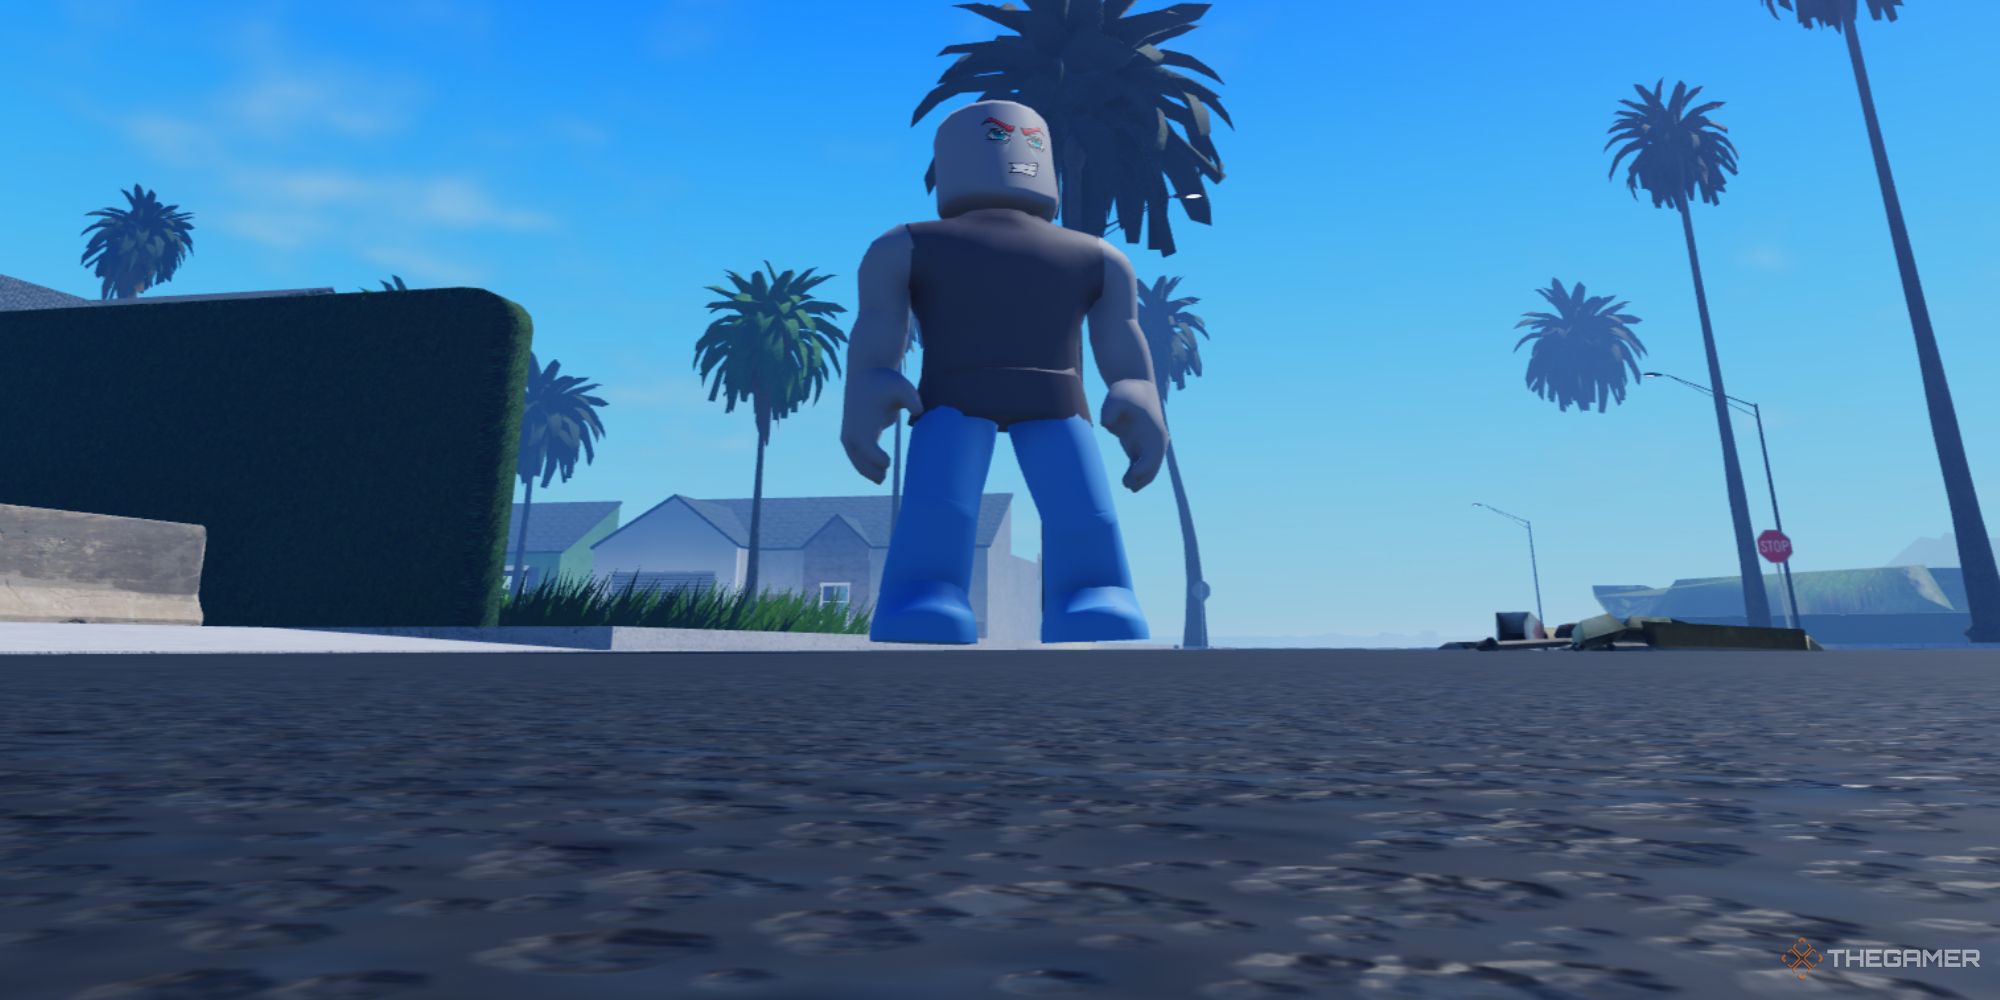 Someone in Cali Shootout on Roblox